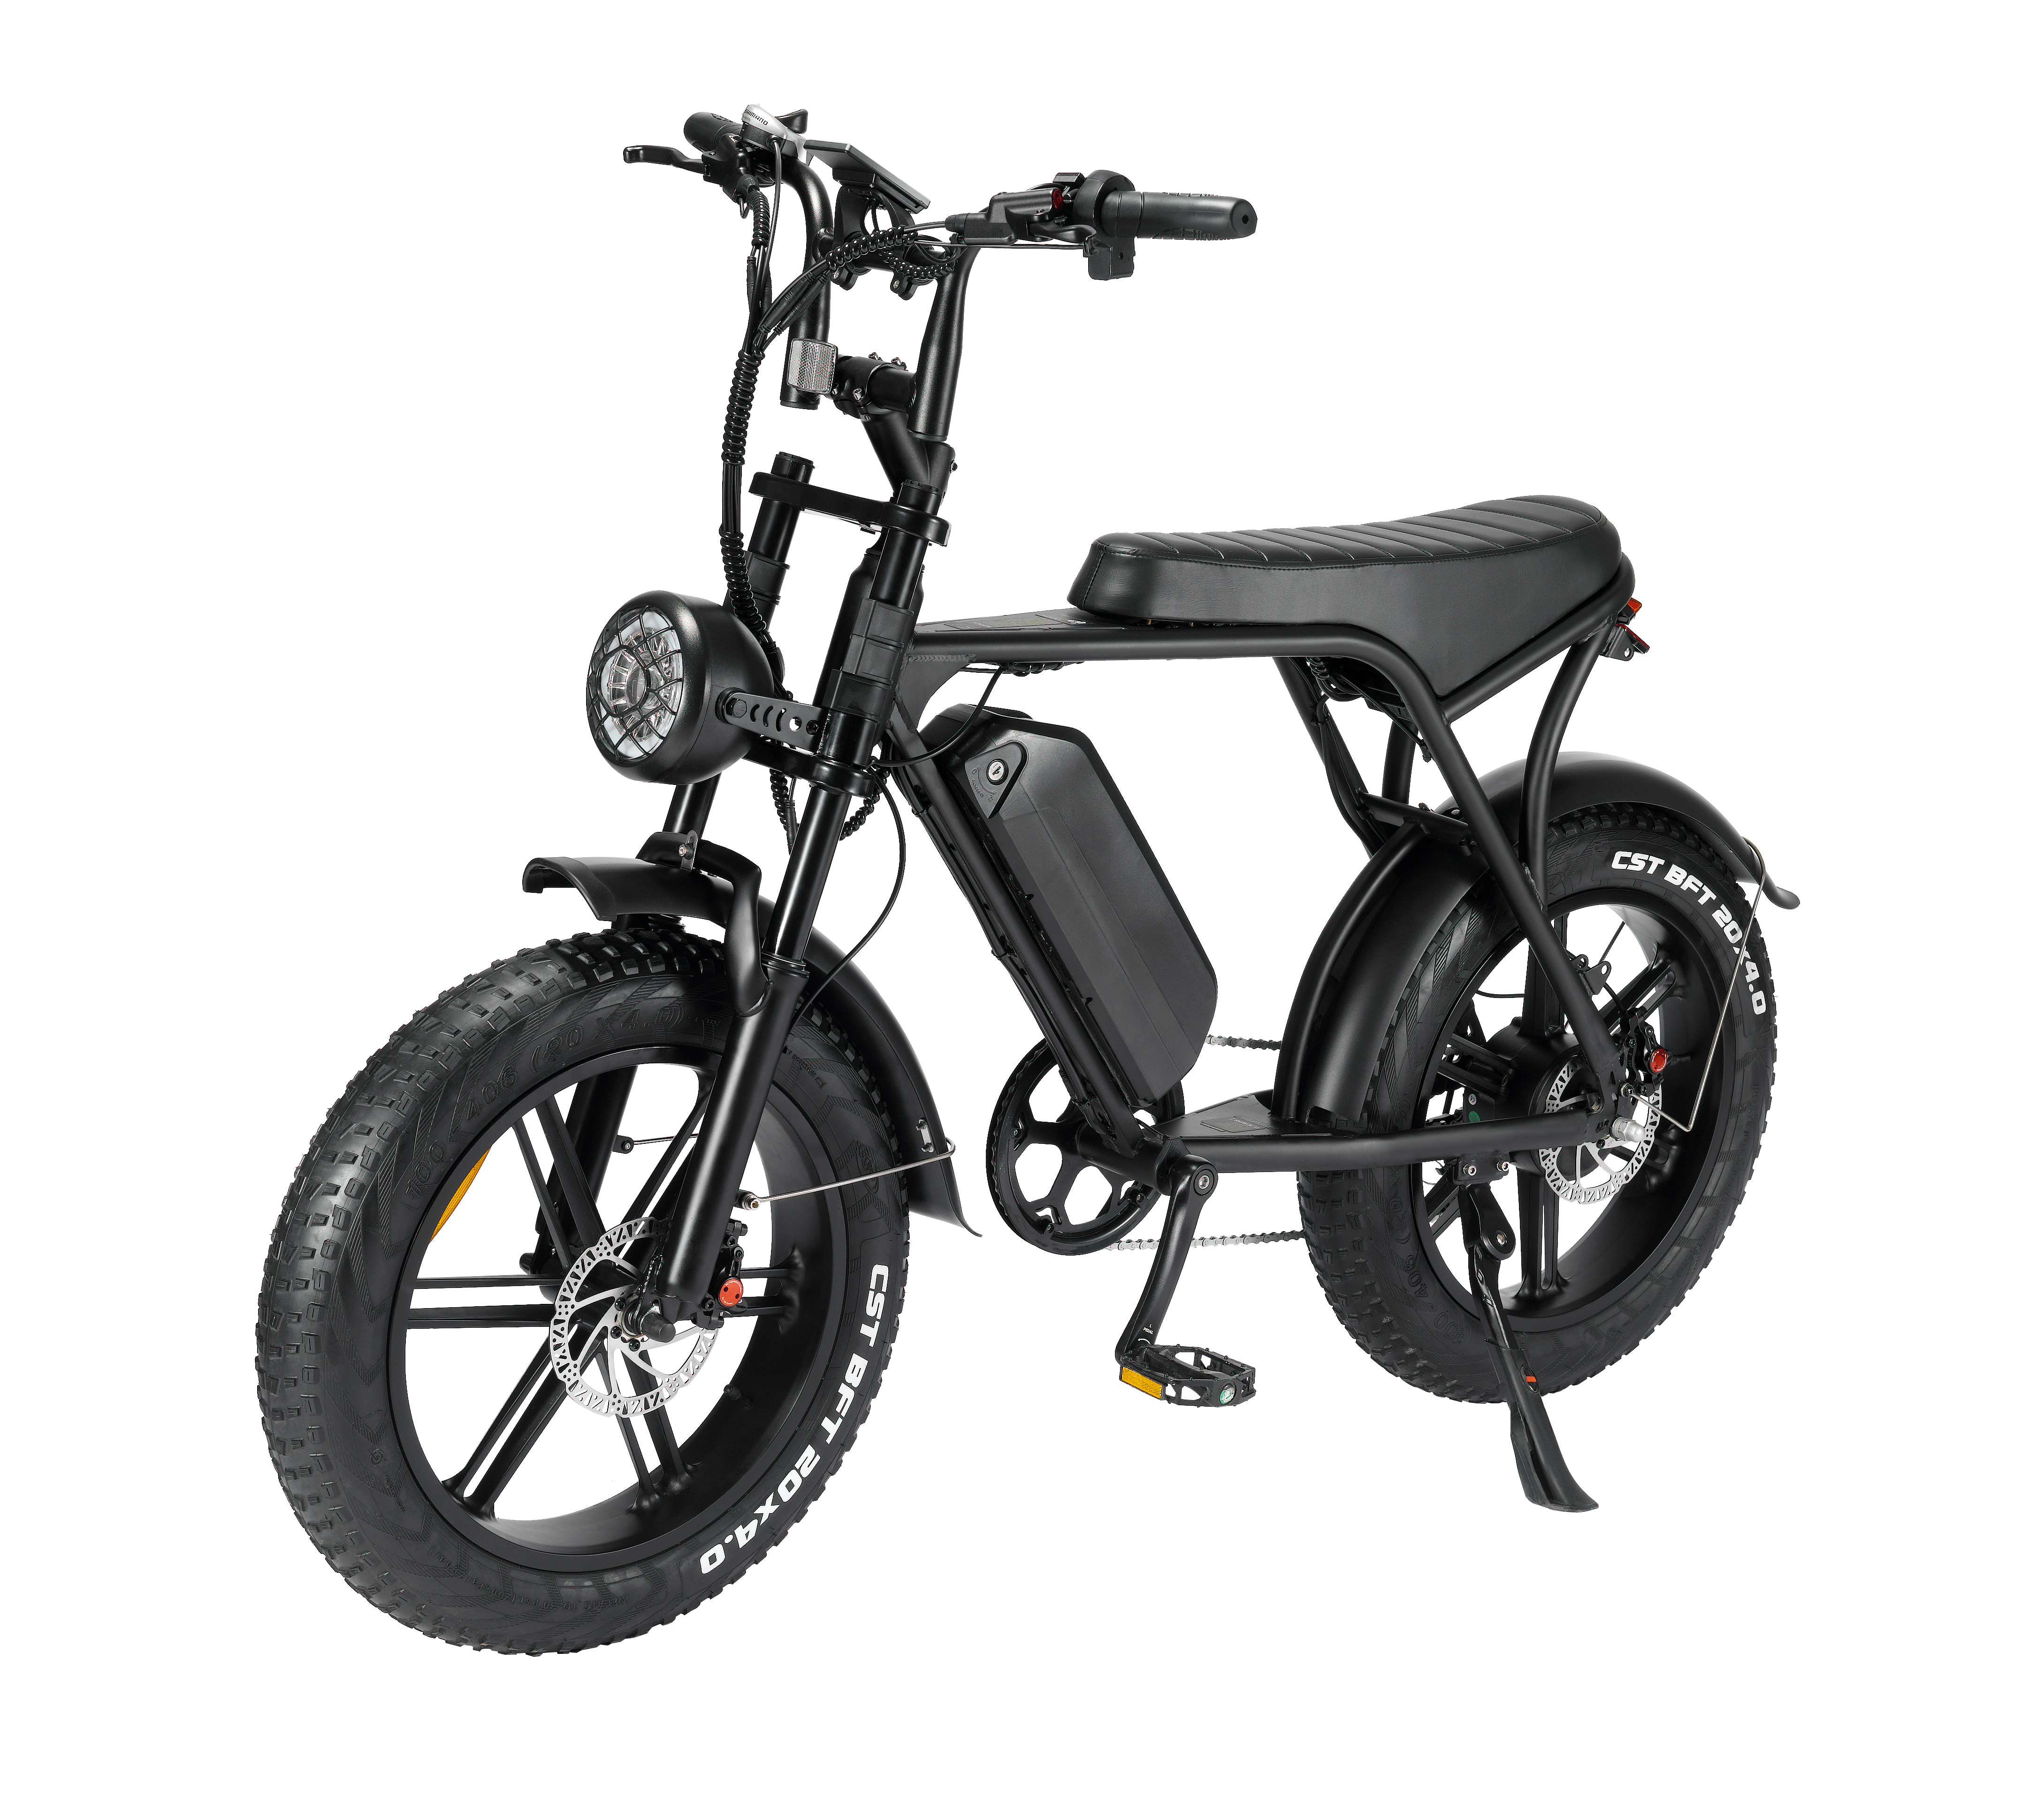 EZ-V8 IEZWAY Electric Bike with 750W Motor, 48V15Ah Battery, Max Speed 31mph and 20 inch Fat Tires